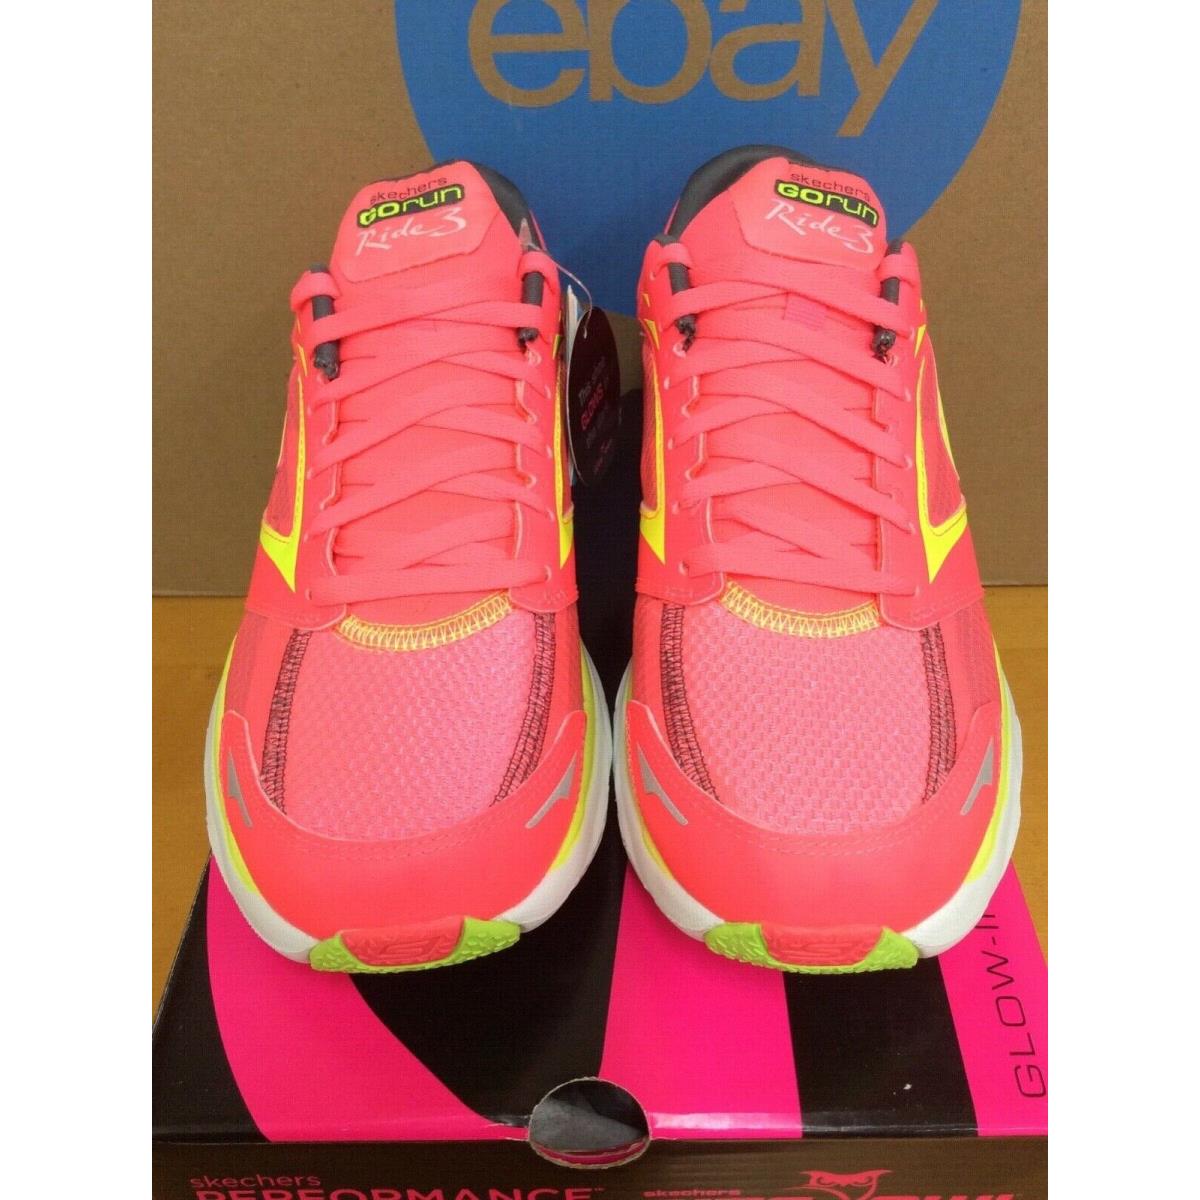 Skechers shoes  - Hot Pink Lime 1